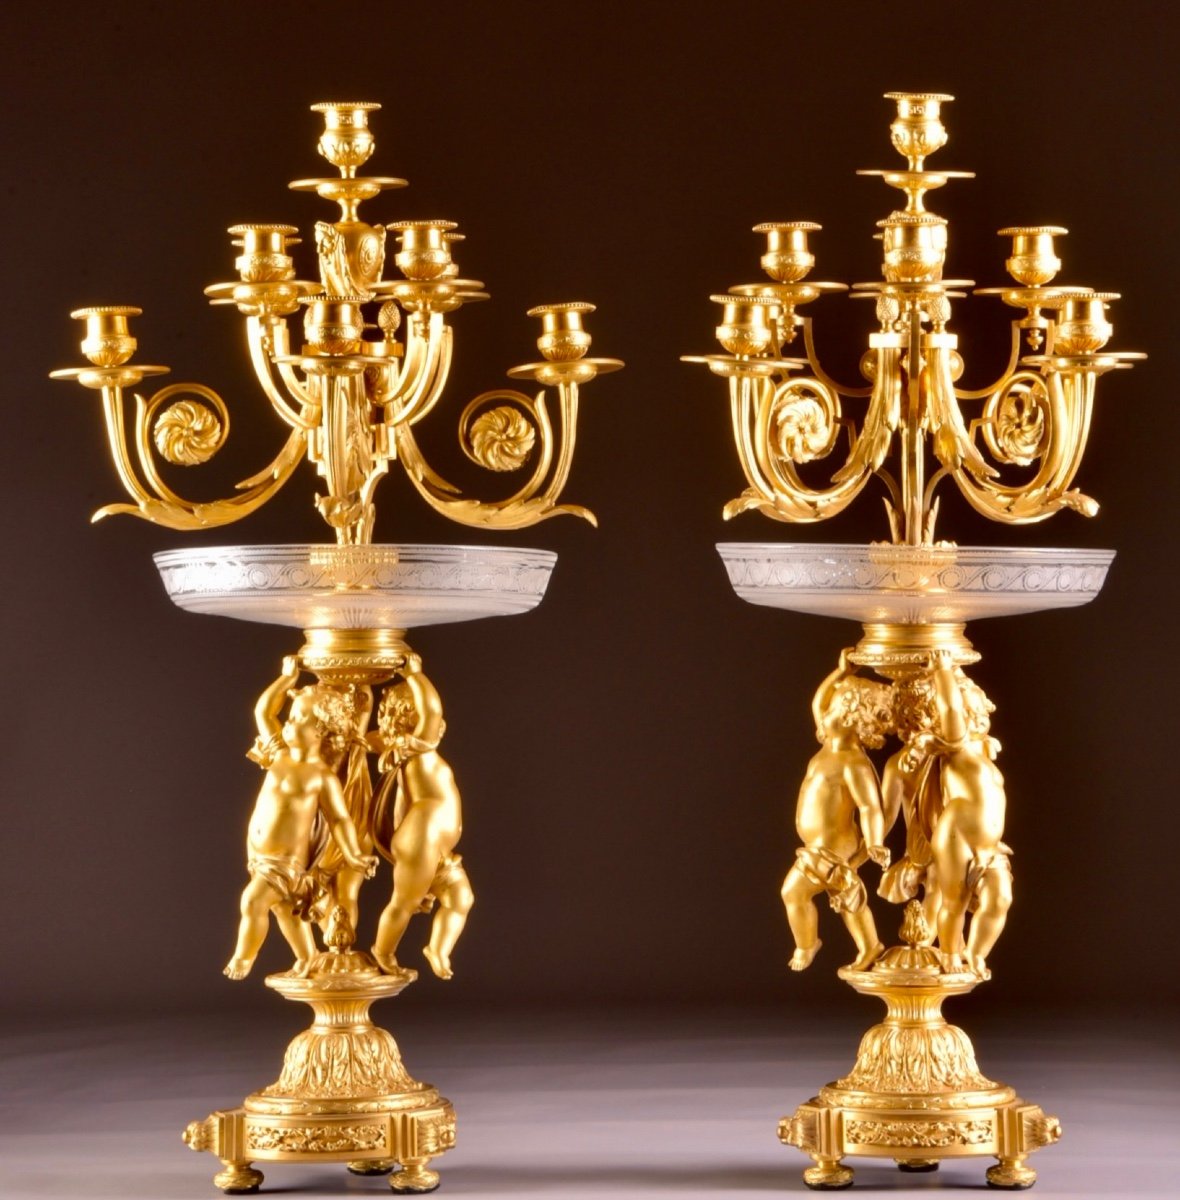 A Magnificent Pair Of Candelabra / Centerpiece, Crystal And Gilt Bronze, Napoleon III